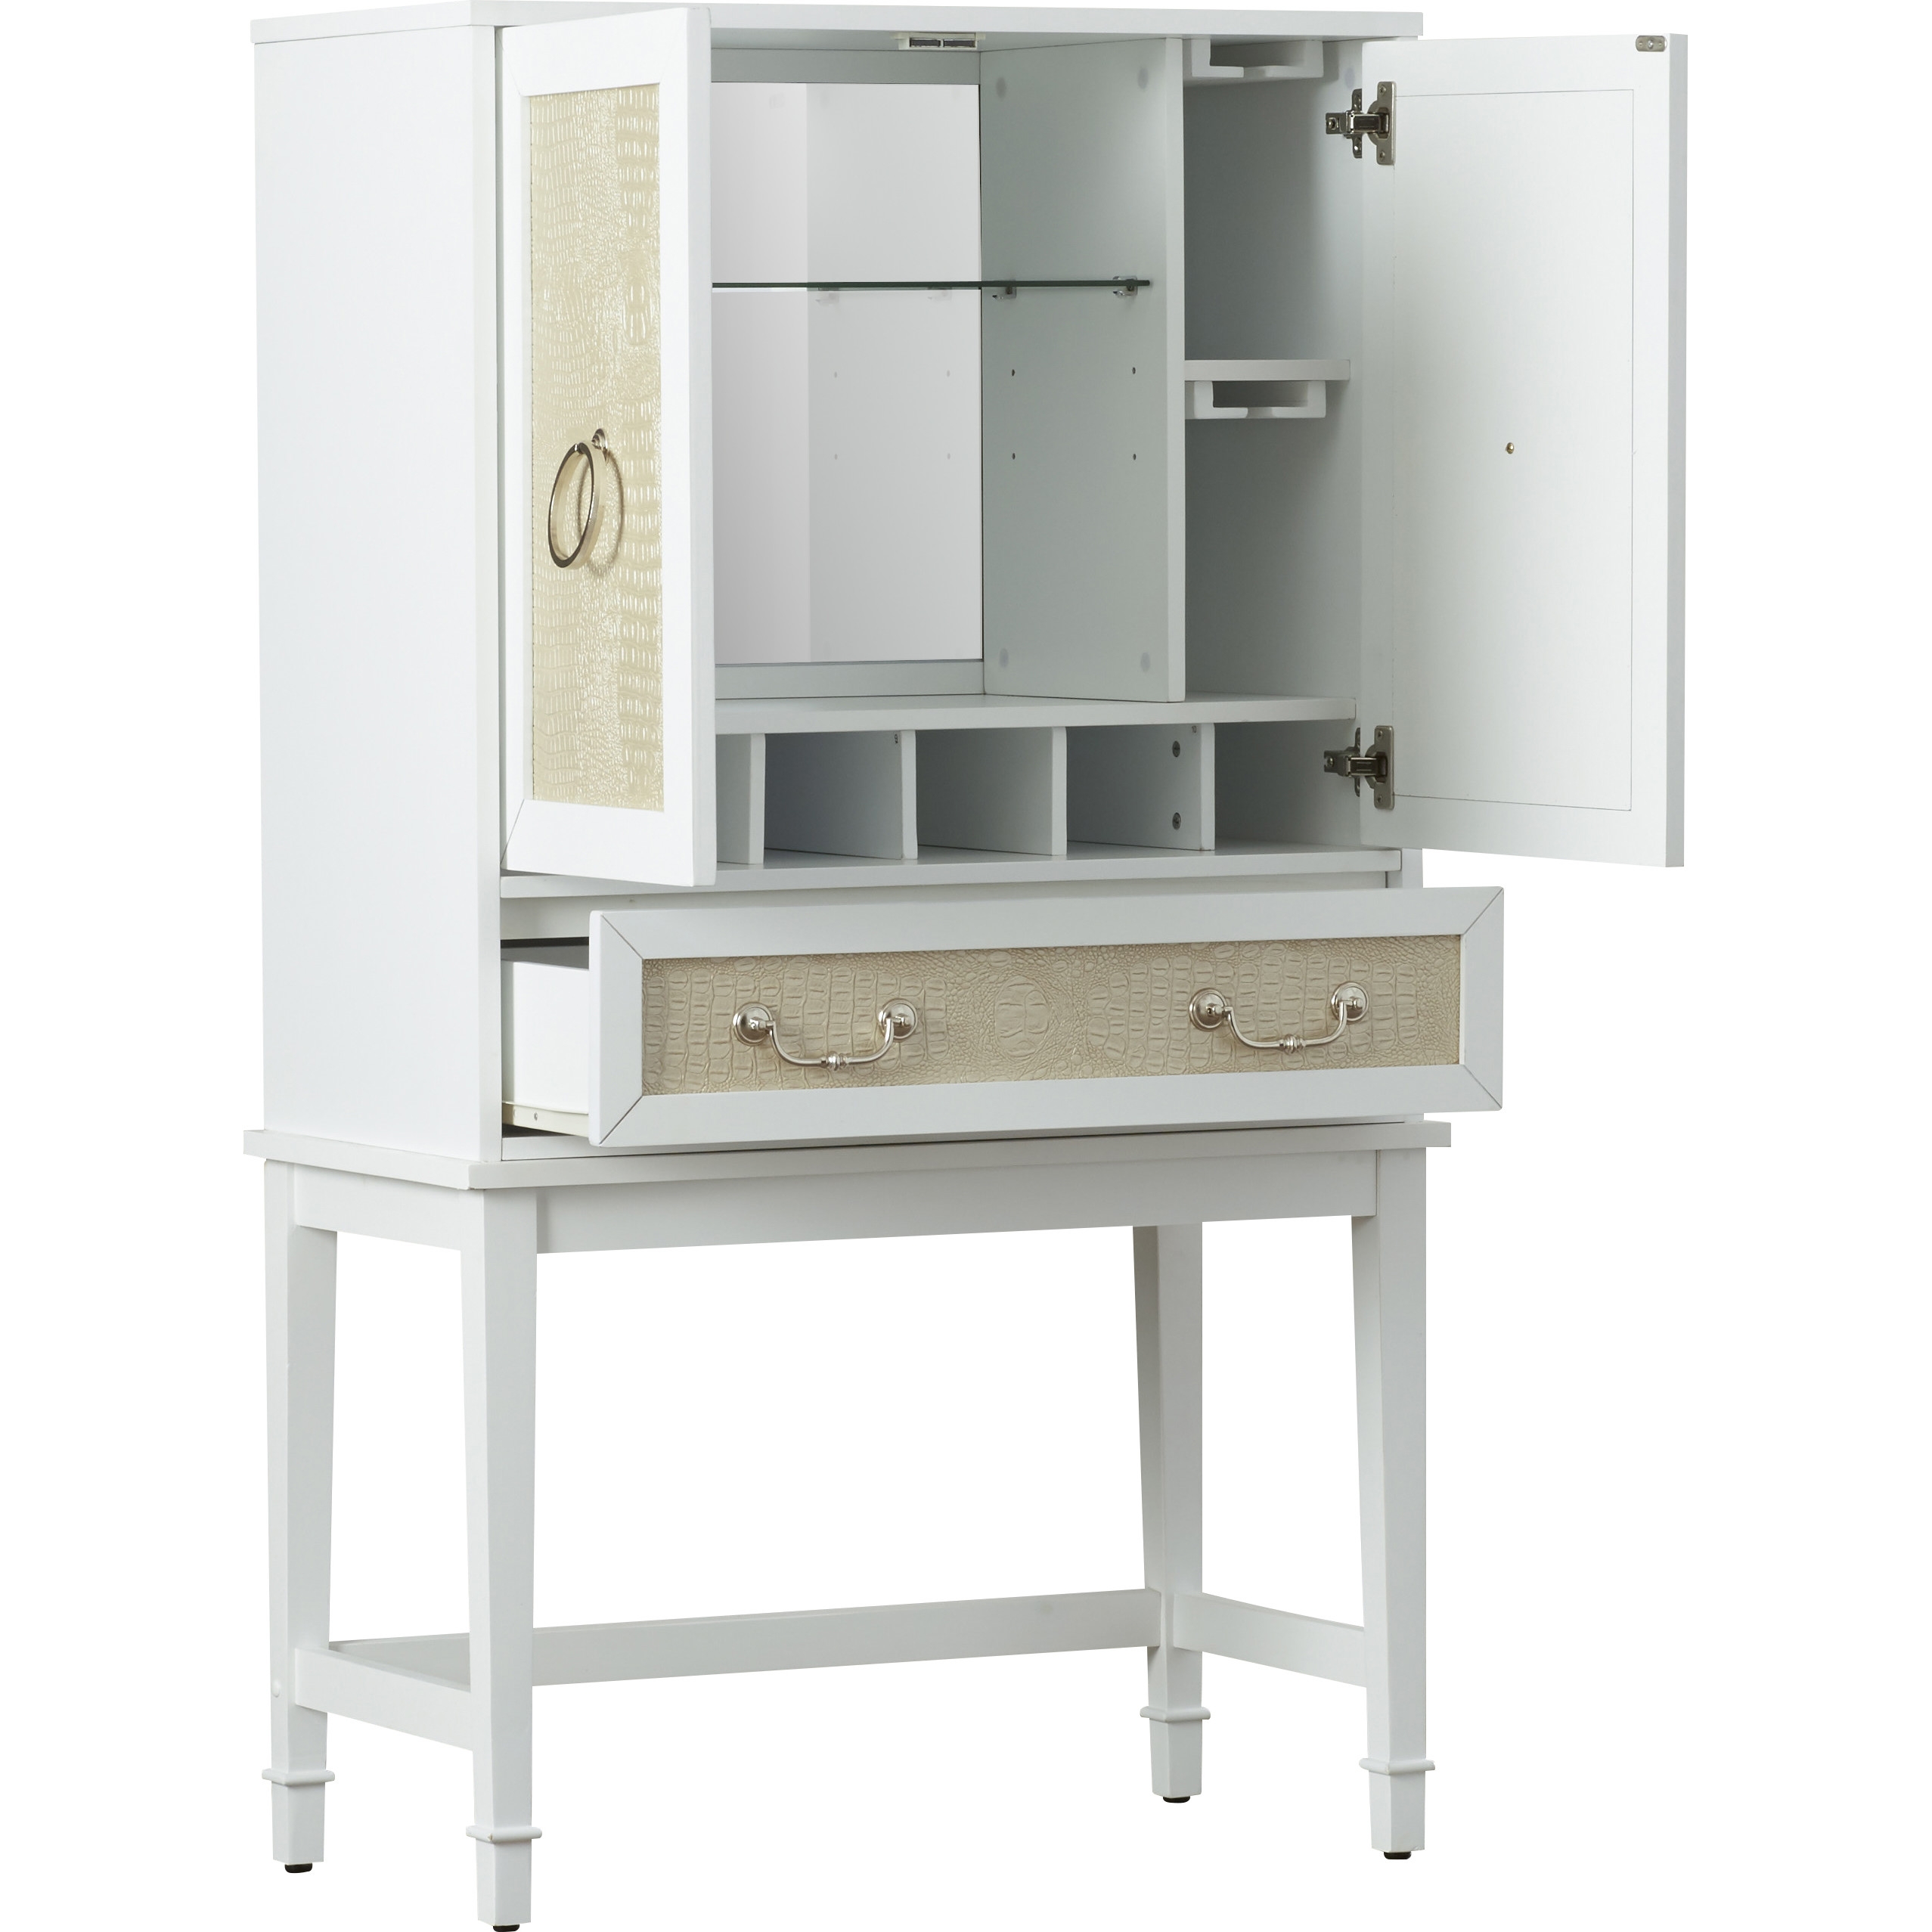 Newhaven Bar Cabinet with Wine Storage - Image 2